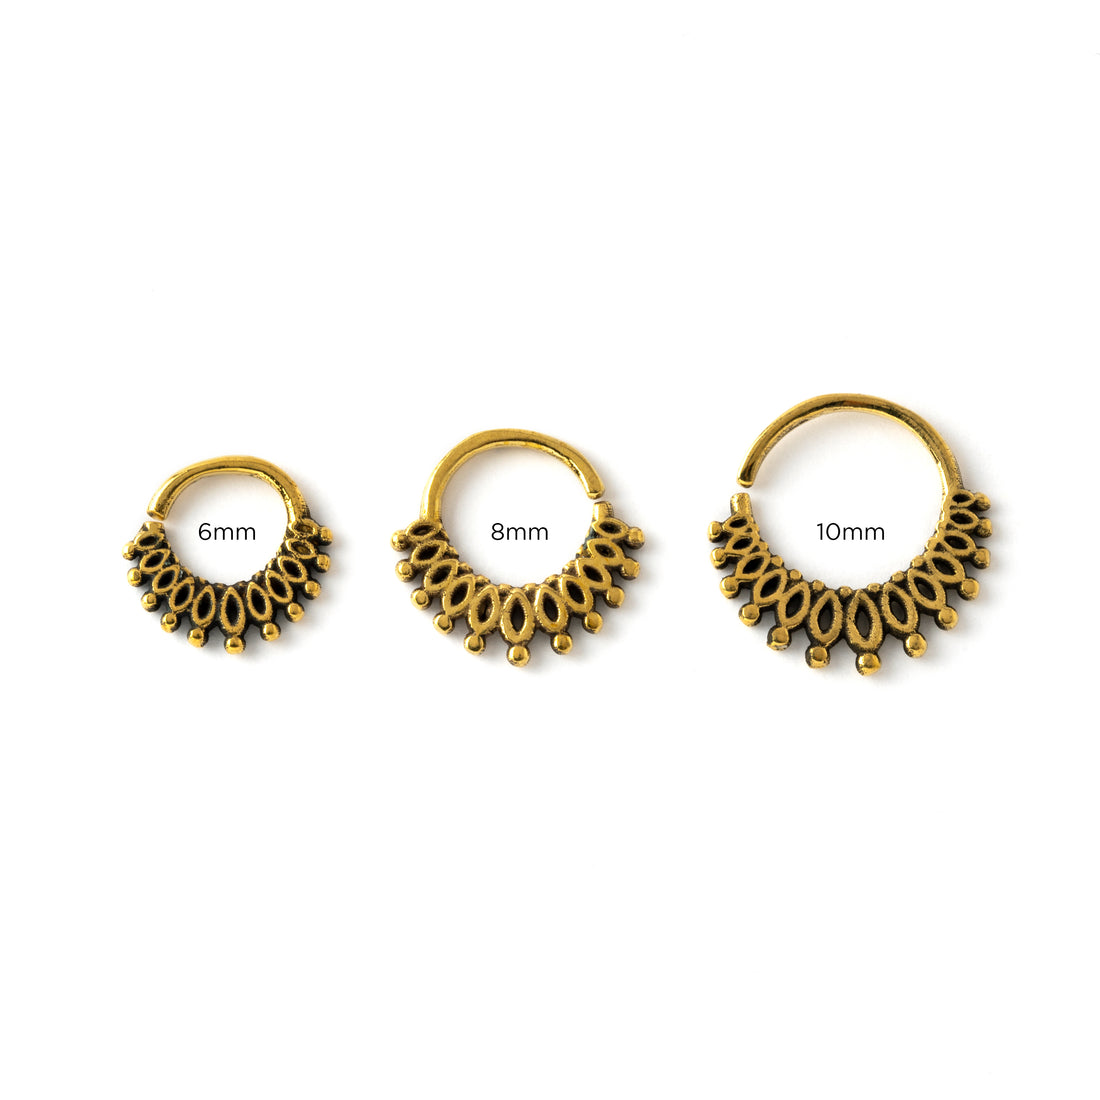 6mm, 8mm and 10mm antique gold colour boho tribal septum ring ornamented with petals